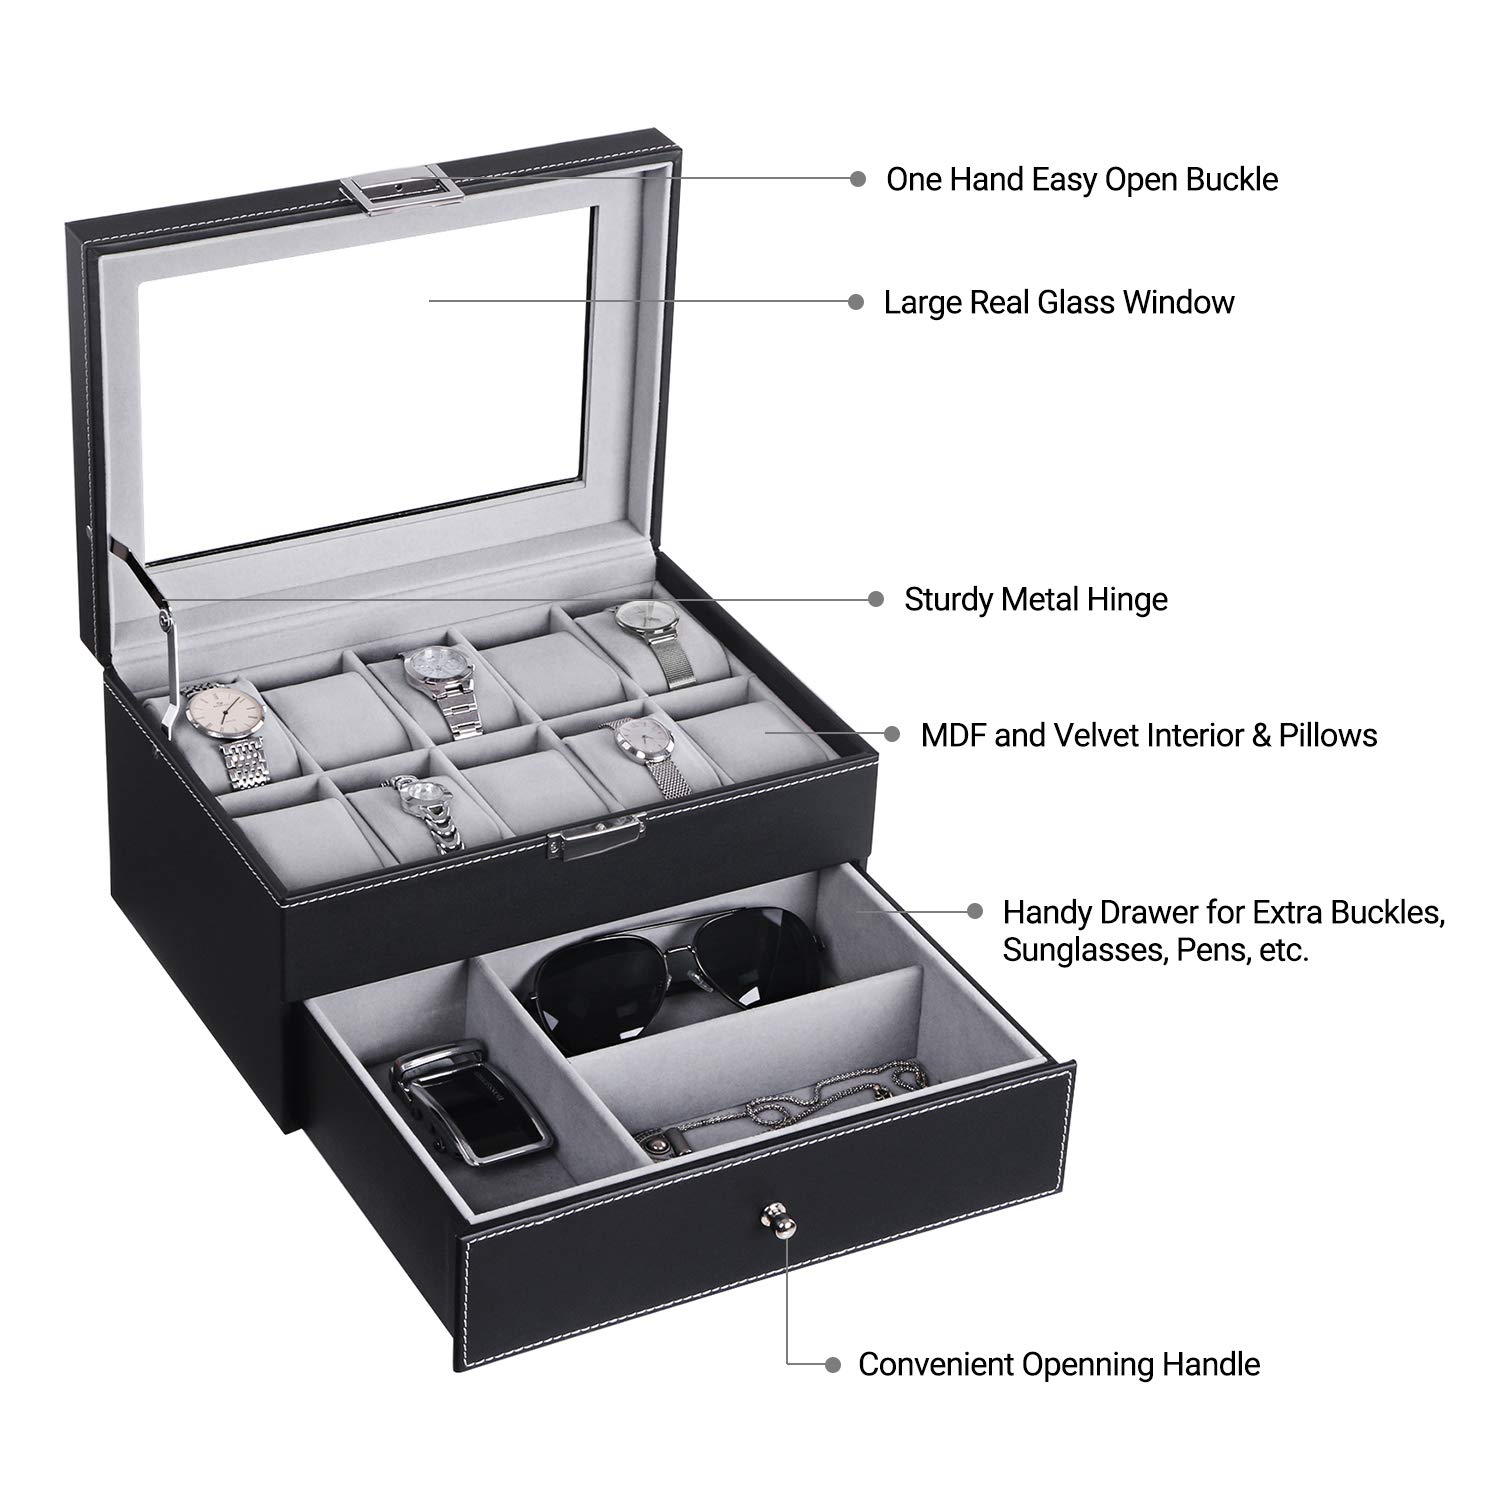 BEWISHOME Watch Box Organizer with Valet Drawer - Real Glass Top, Metal Hinge, Large Holder, Black PU Leather - 10 Slots Watch Storage Case Jewelry Box for Men SSH14B